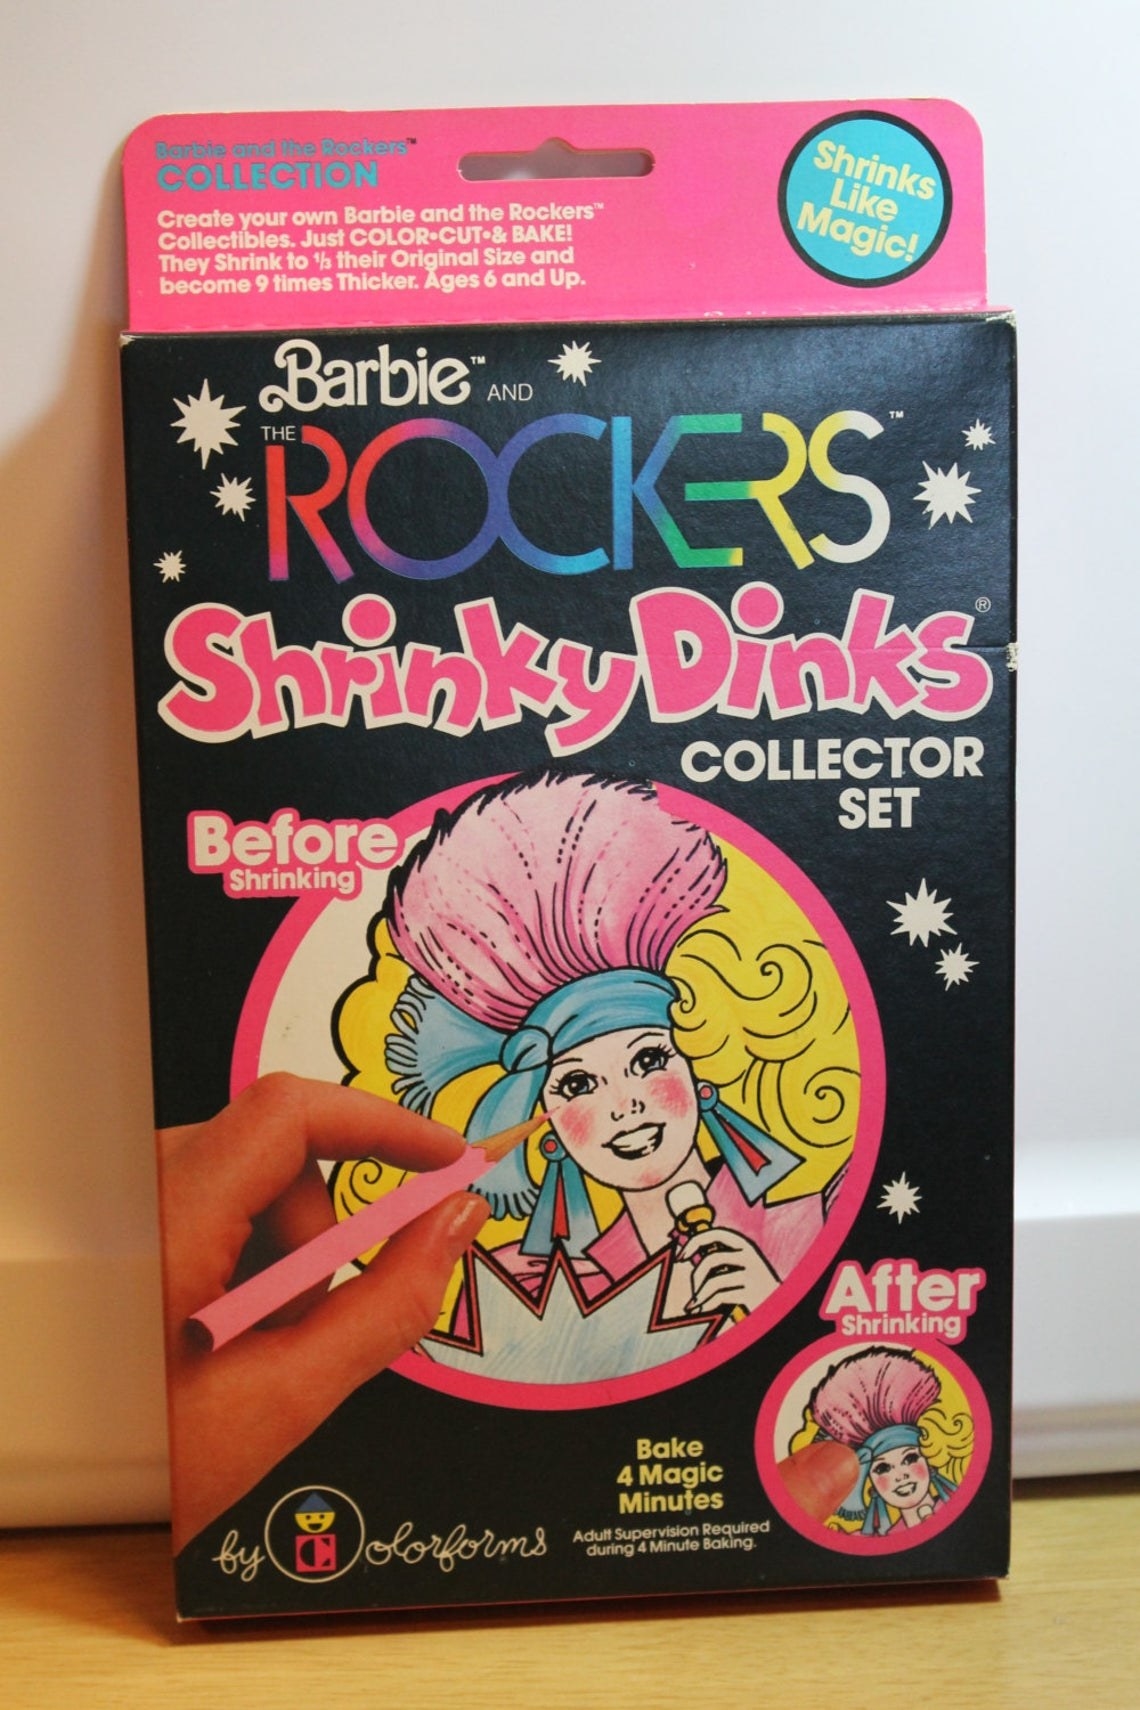 A Barbie and the Rockers Shrinky Dinks in its original box.